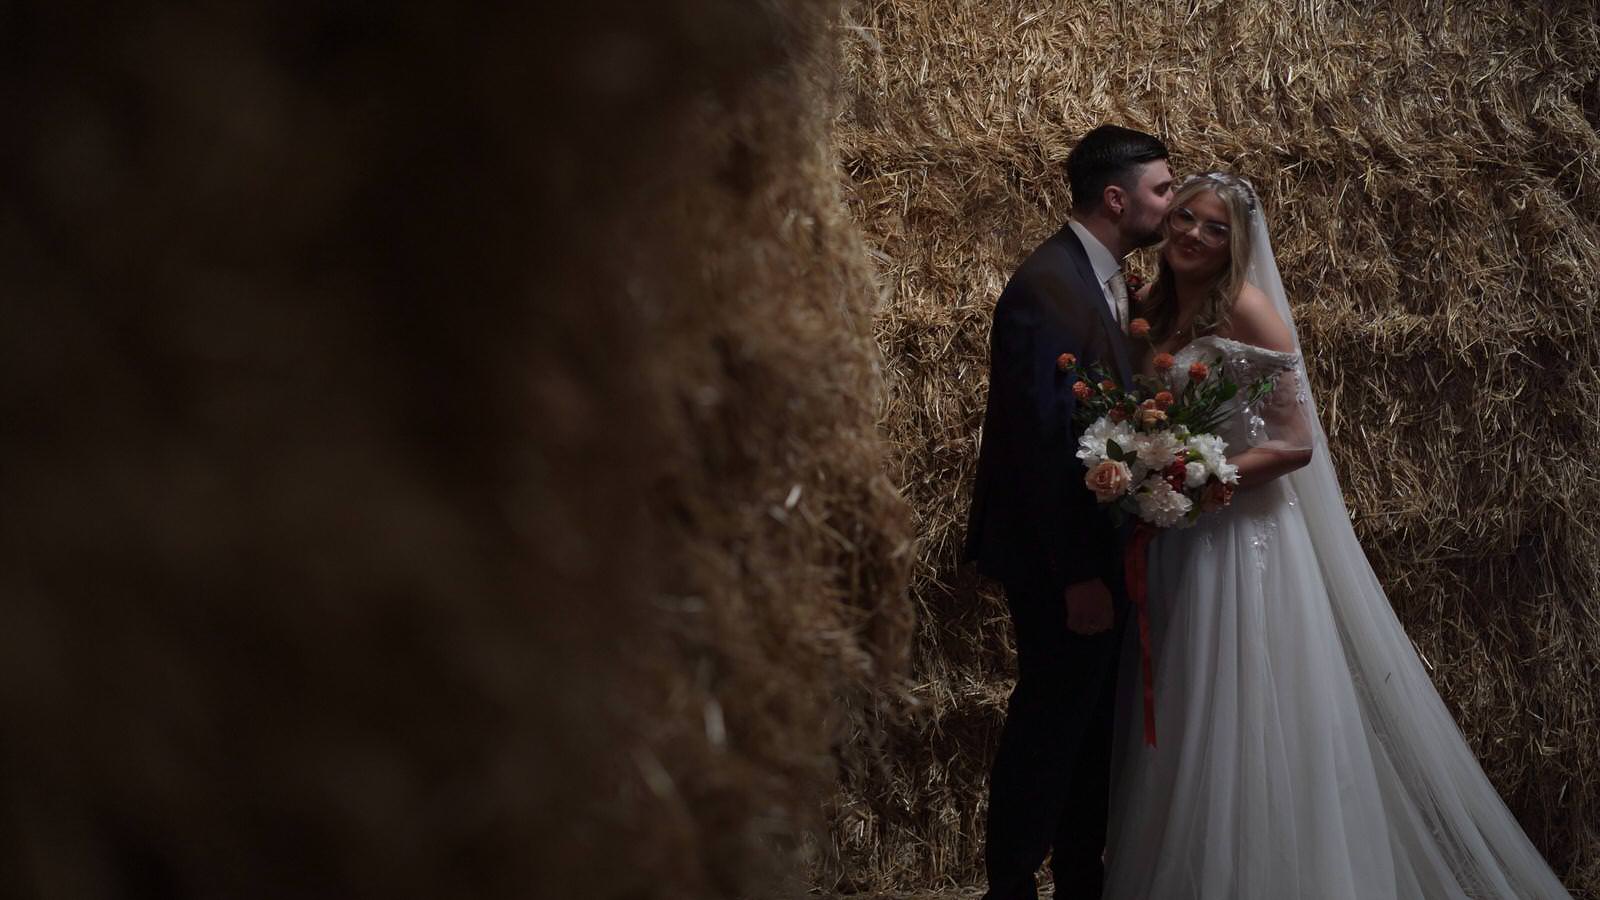 couple stand in a pool of natural light by farm straw bales